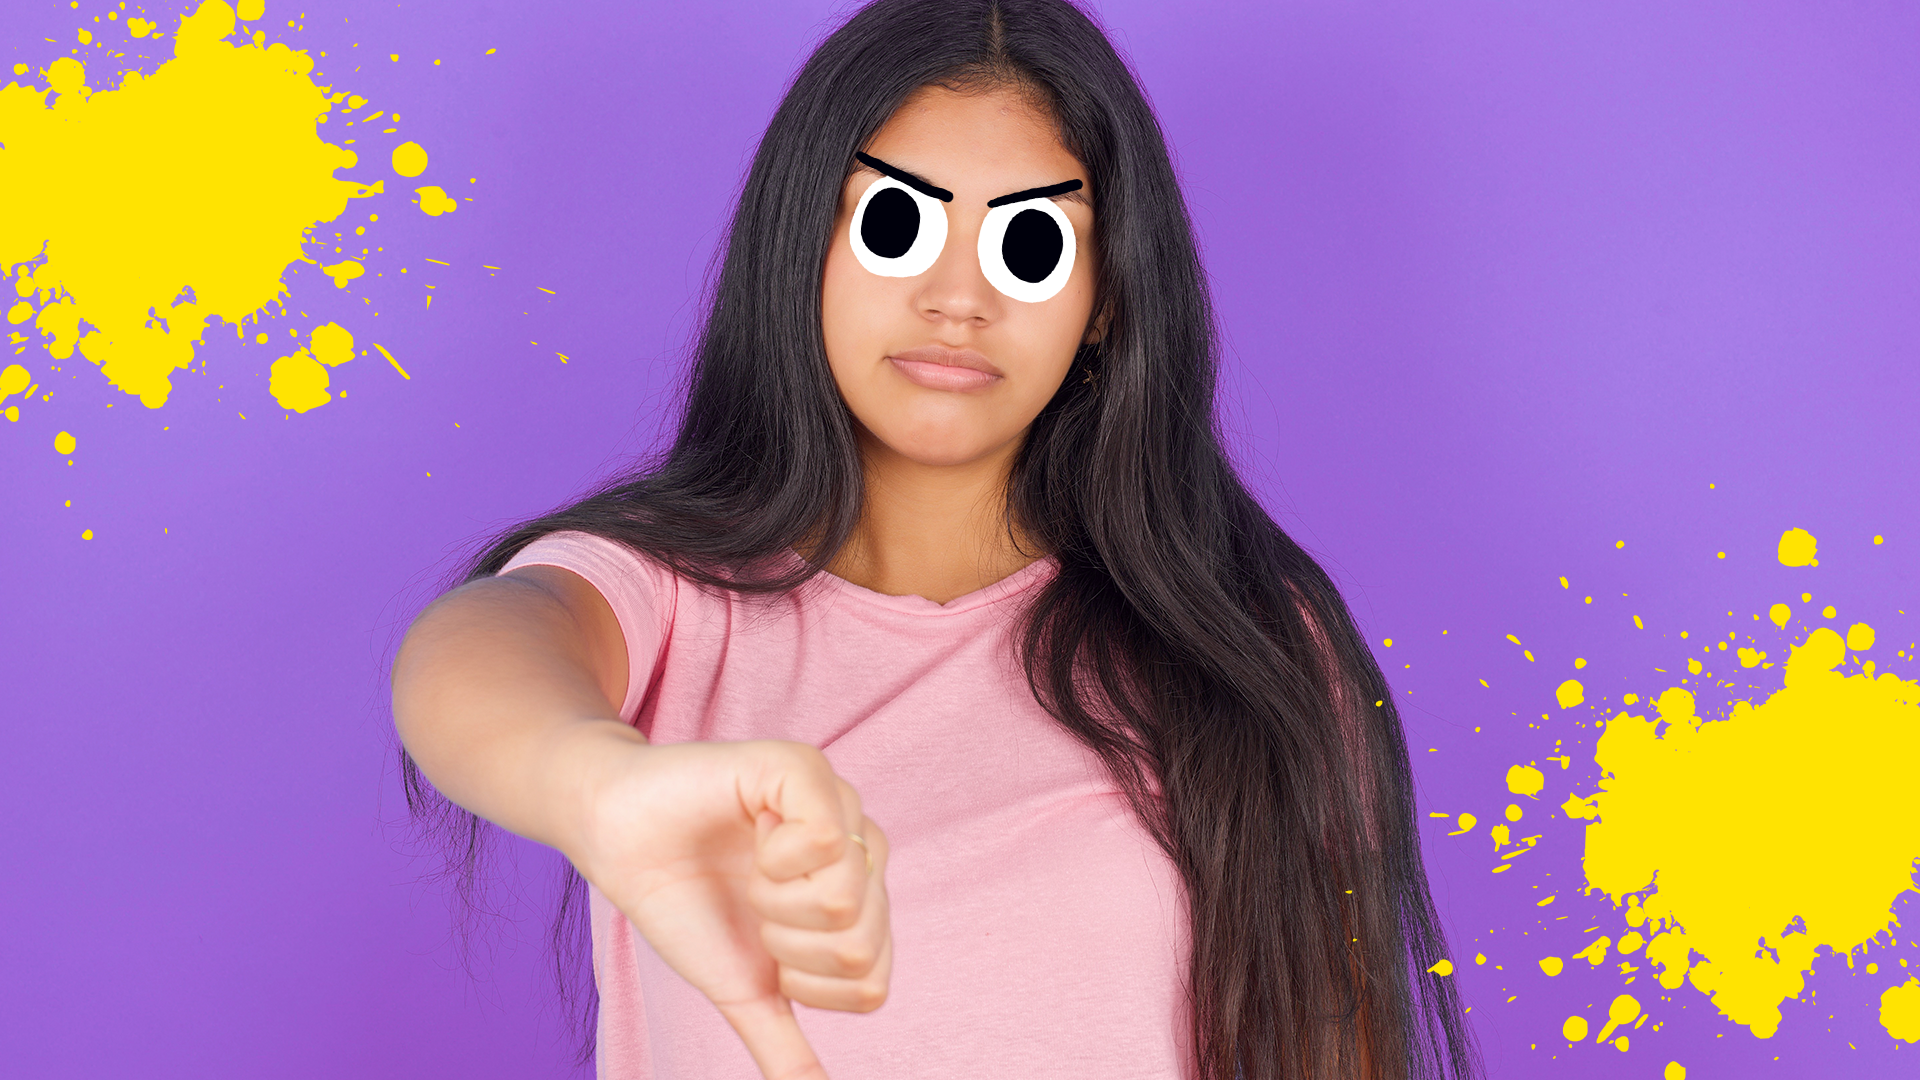 Grumpy woman doing thumbs down on purple background with splats